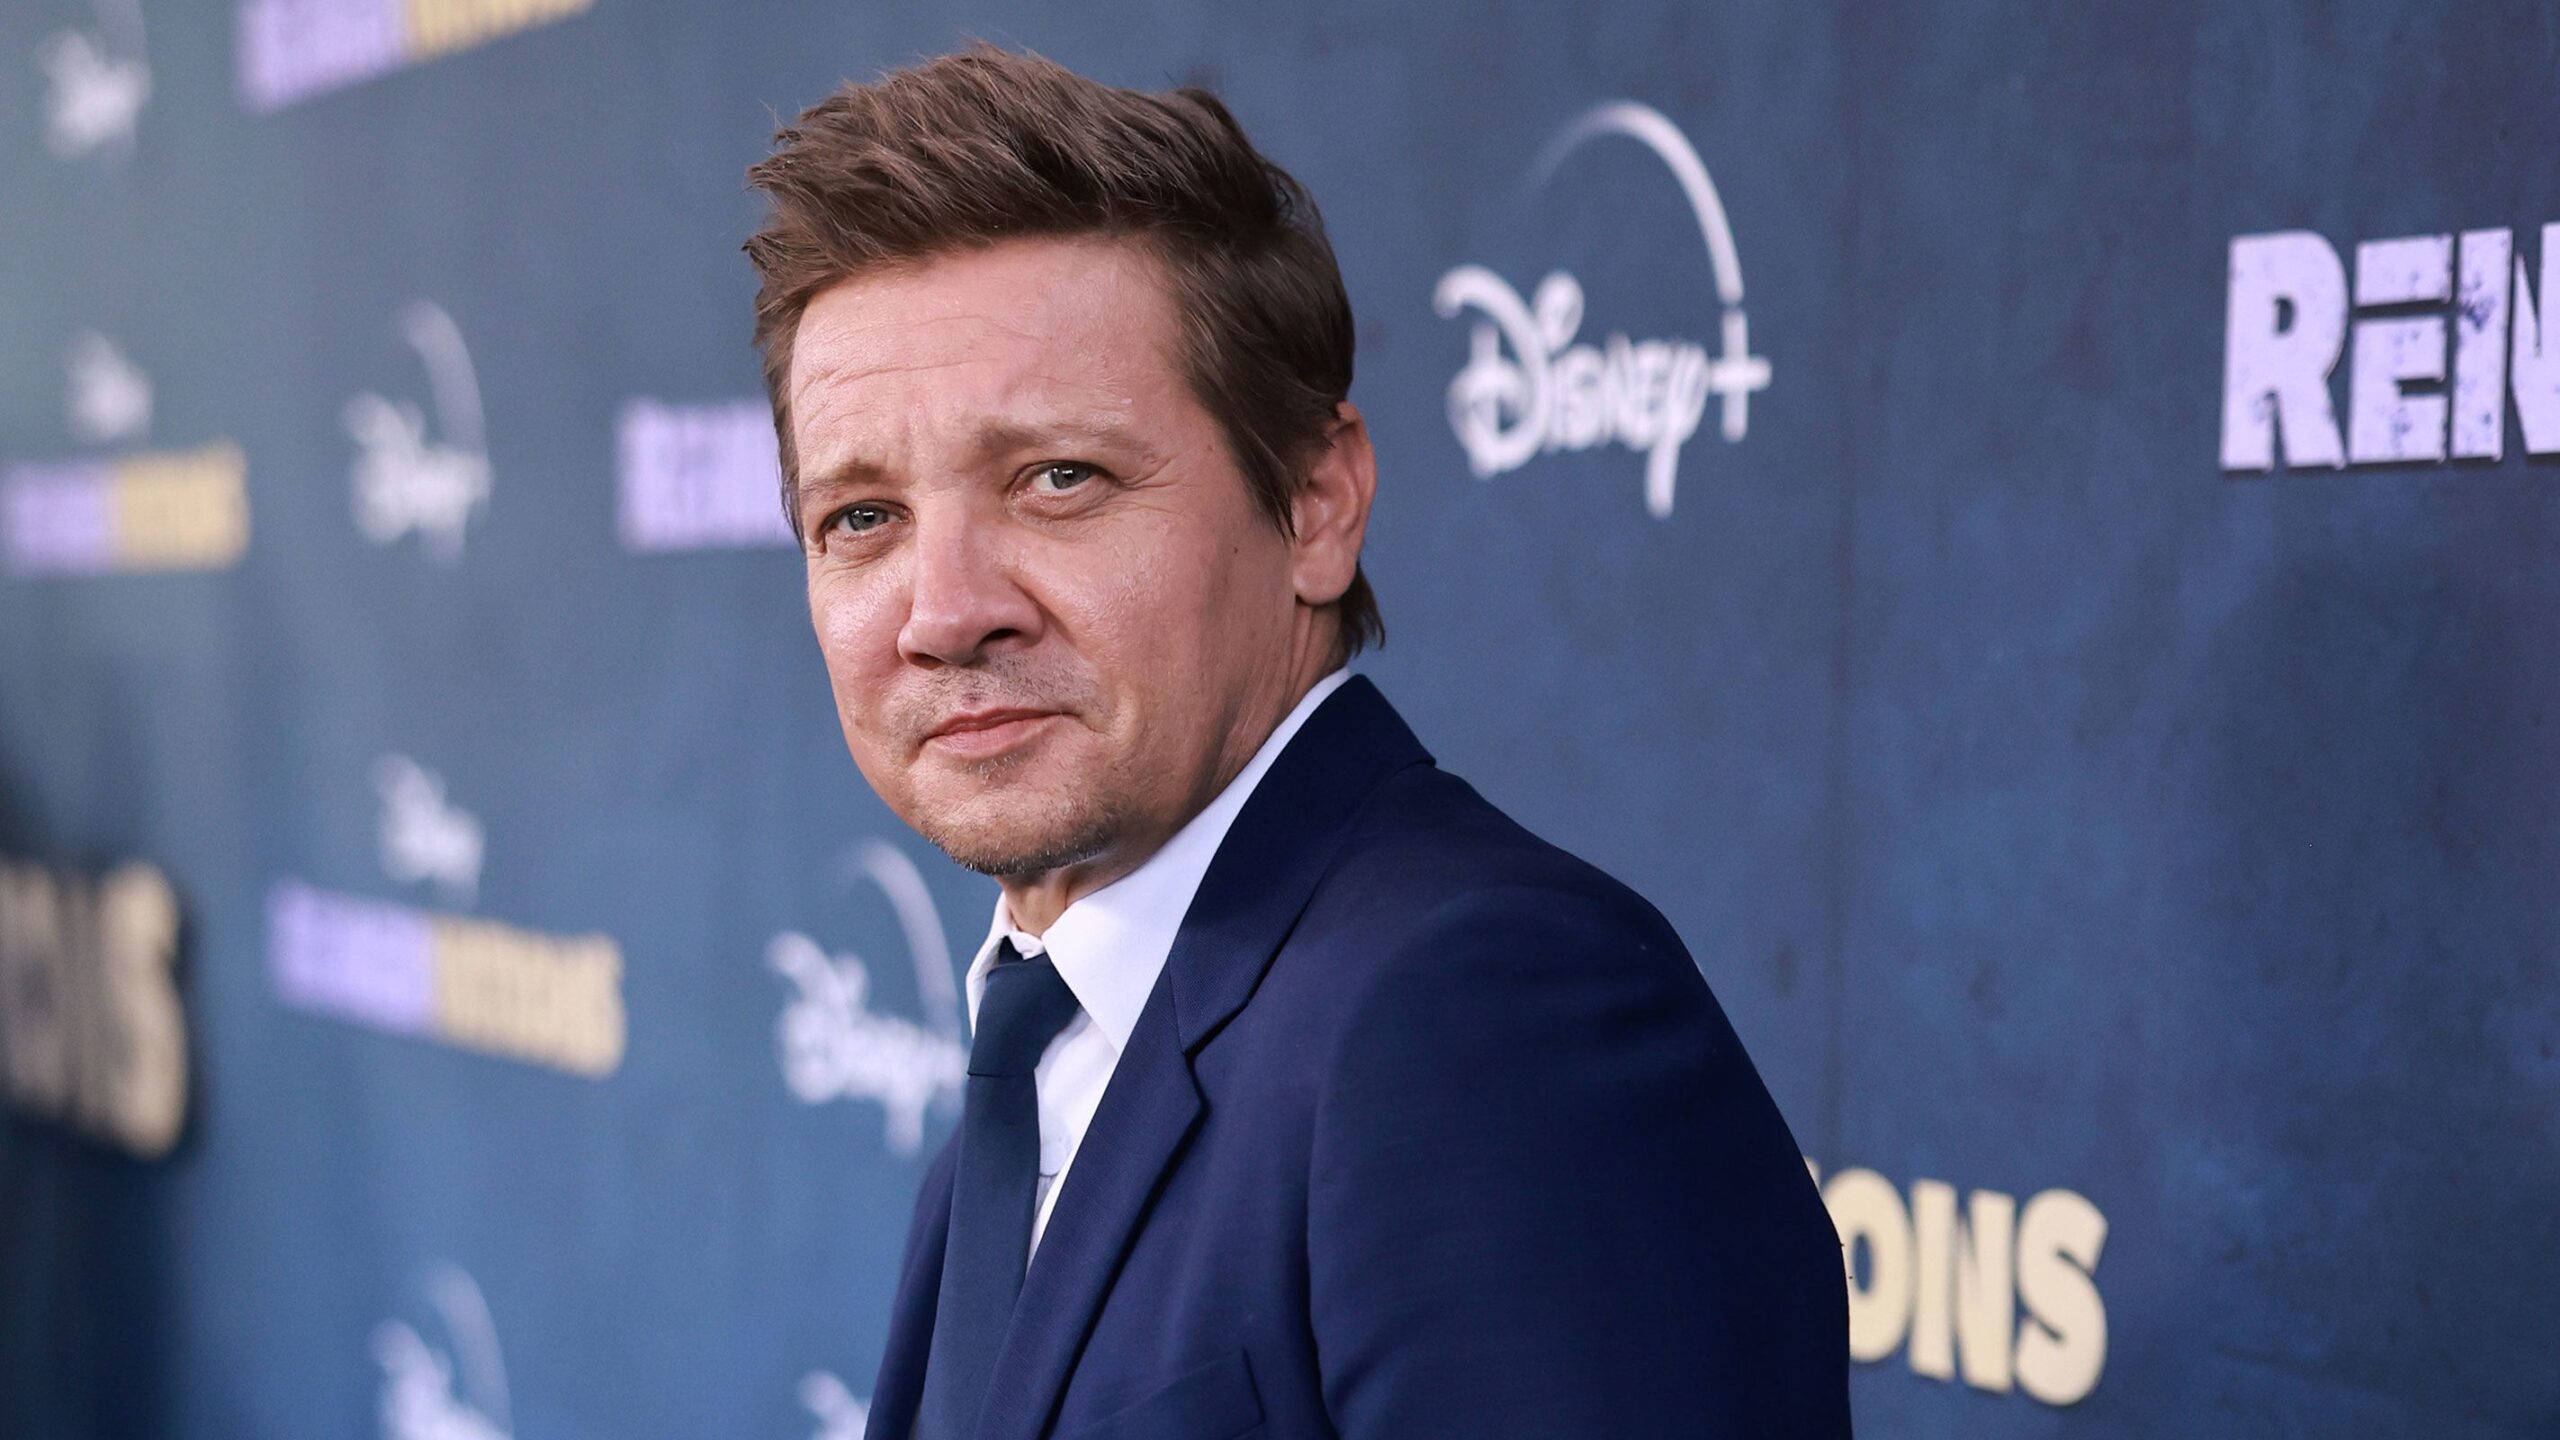 Jeremy Renner, seen here on April 11 in Los Angeles, is revealing how his life has changed since hi...